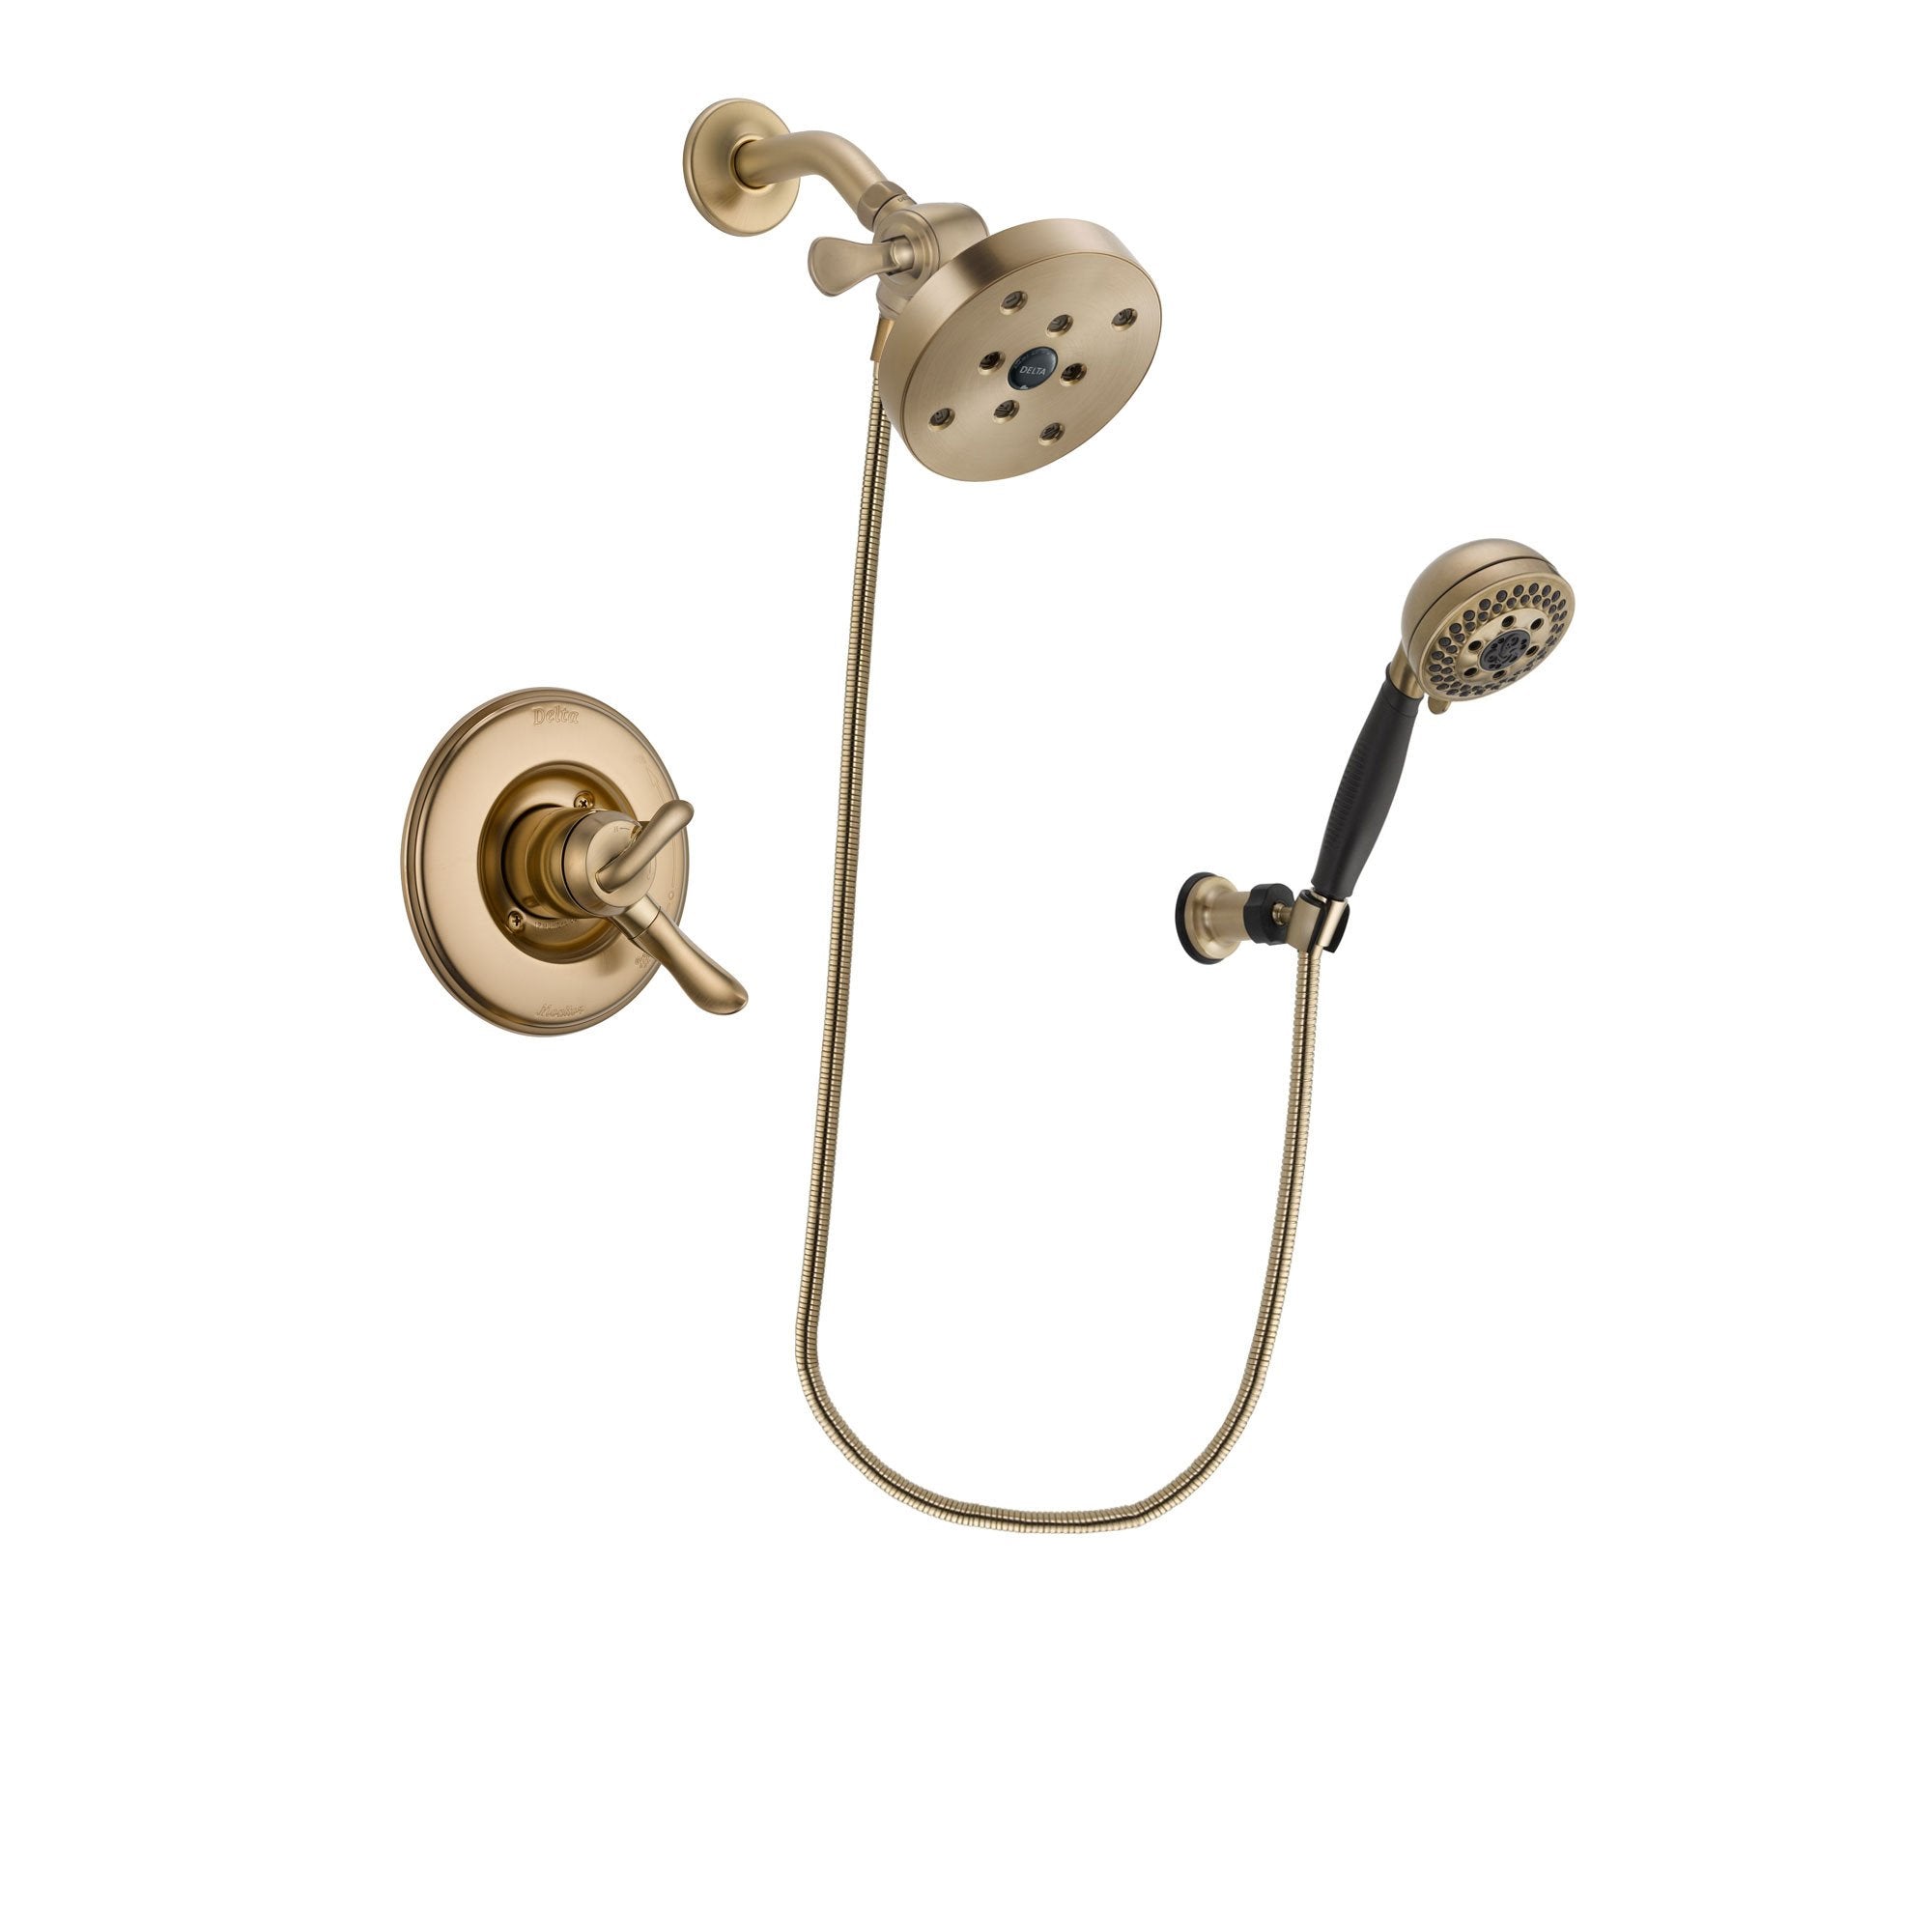 Delta Linden Champagne Bronze Finish Dual Control Shower Faucet System Package with 5-1/2 inch Showerhead and 5-Spray Wall Mount Hand Shower Includes Rough-in Valve DSP3834V